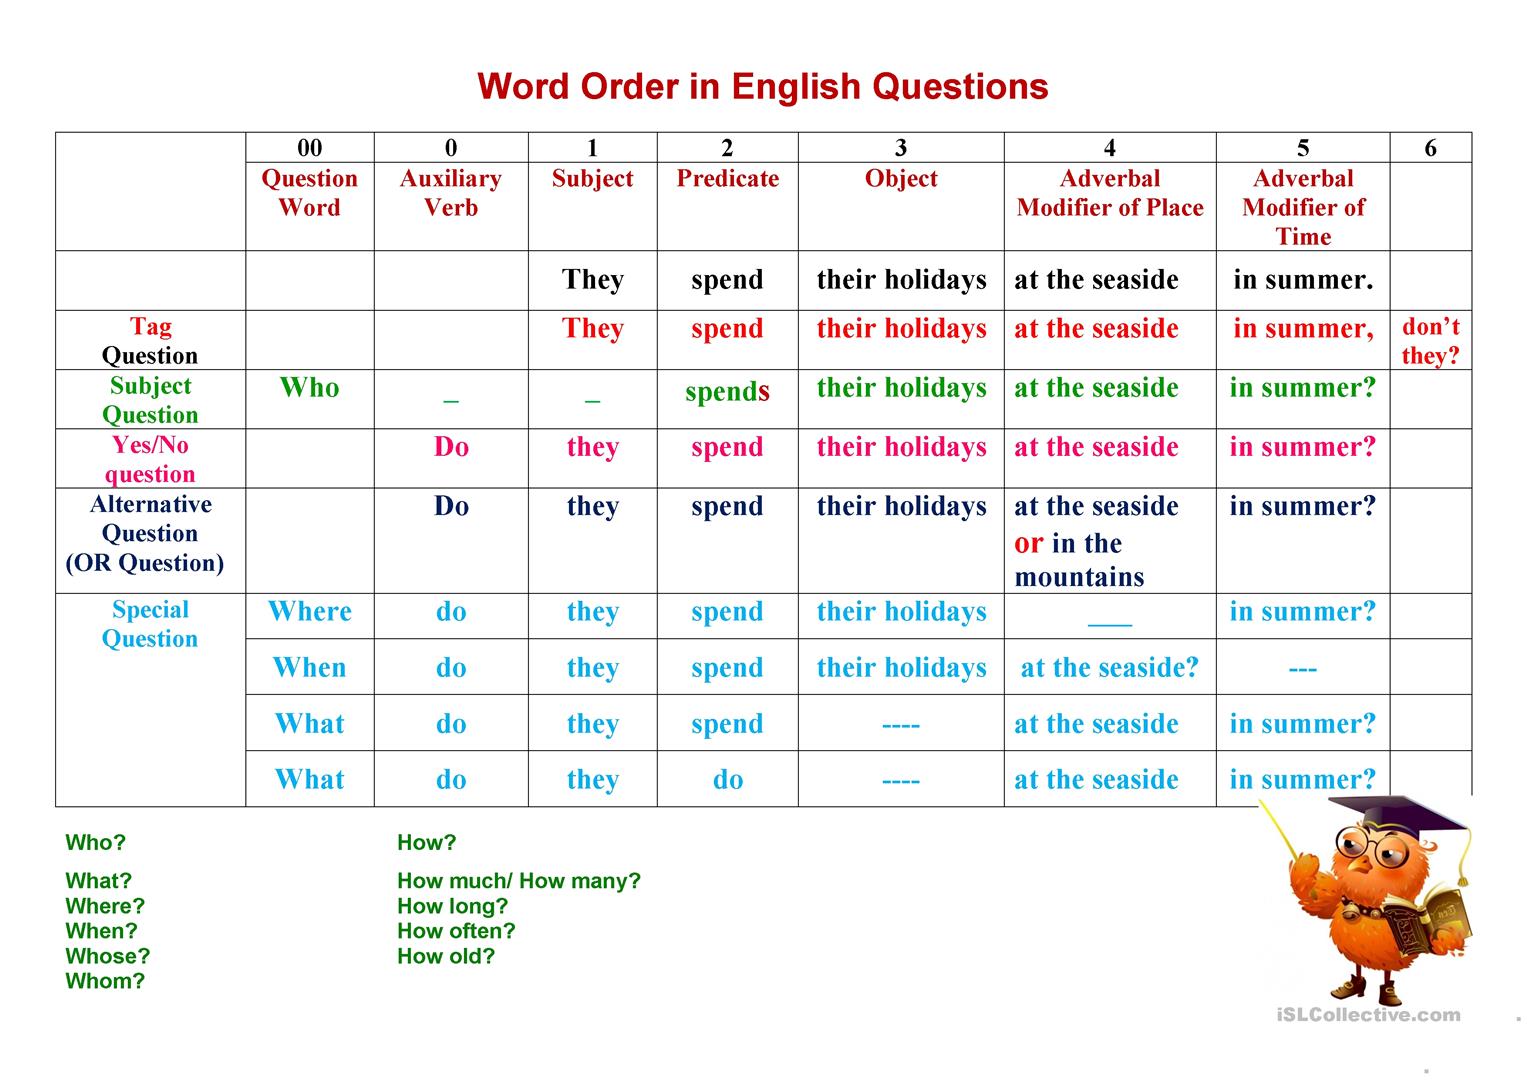 Types of questions word order in an english questi grammar guides 